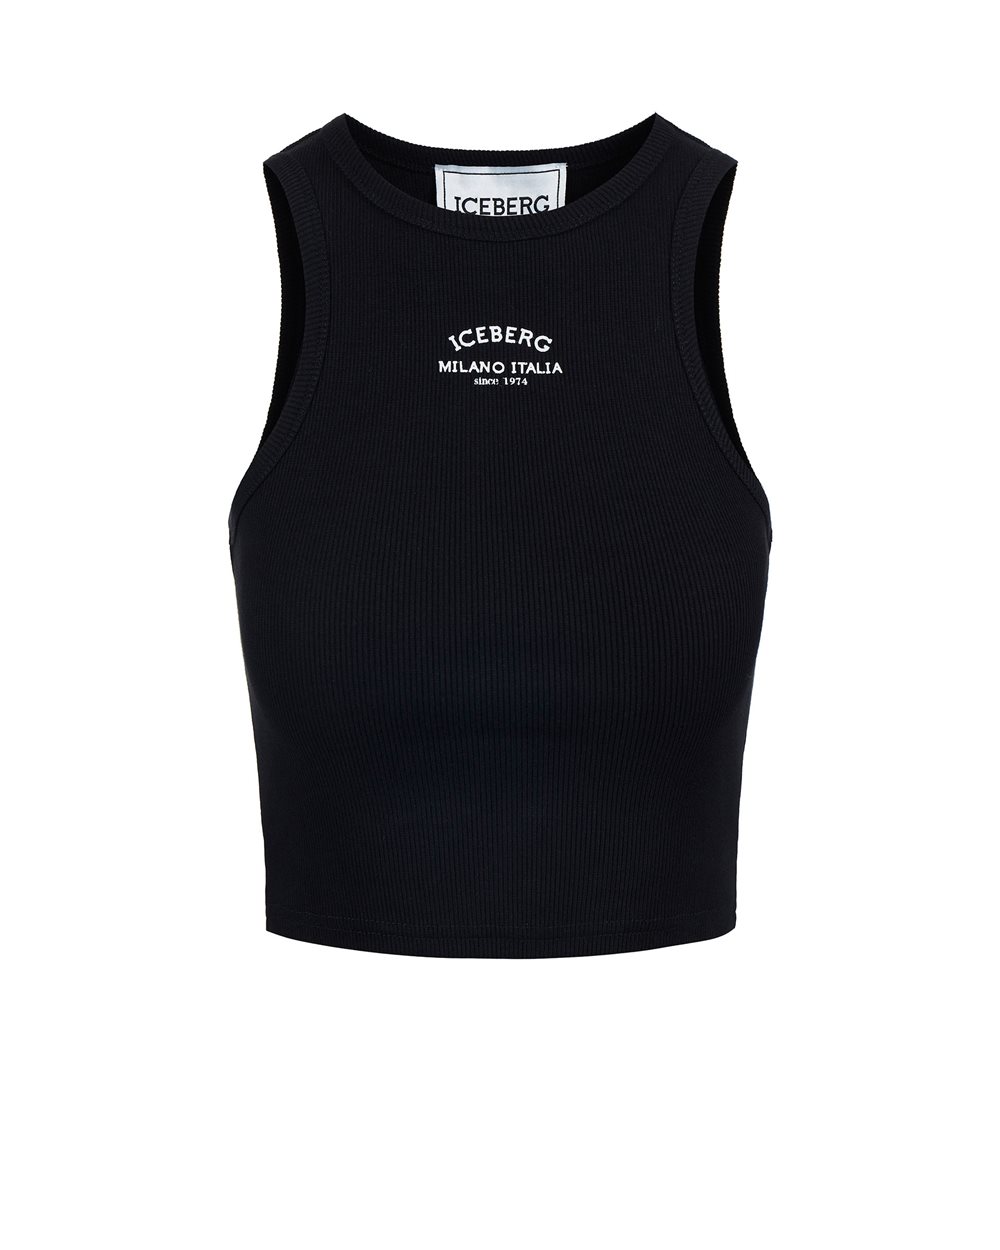 Crop top with logo - New in | Iceberg - Official Website